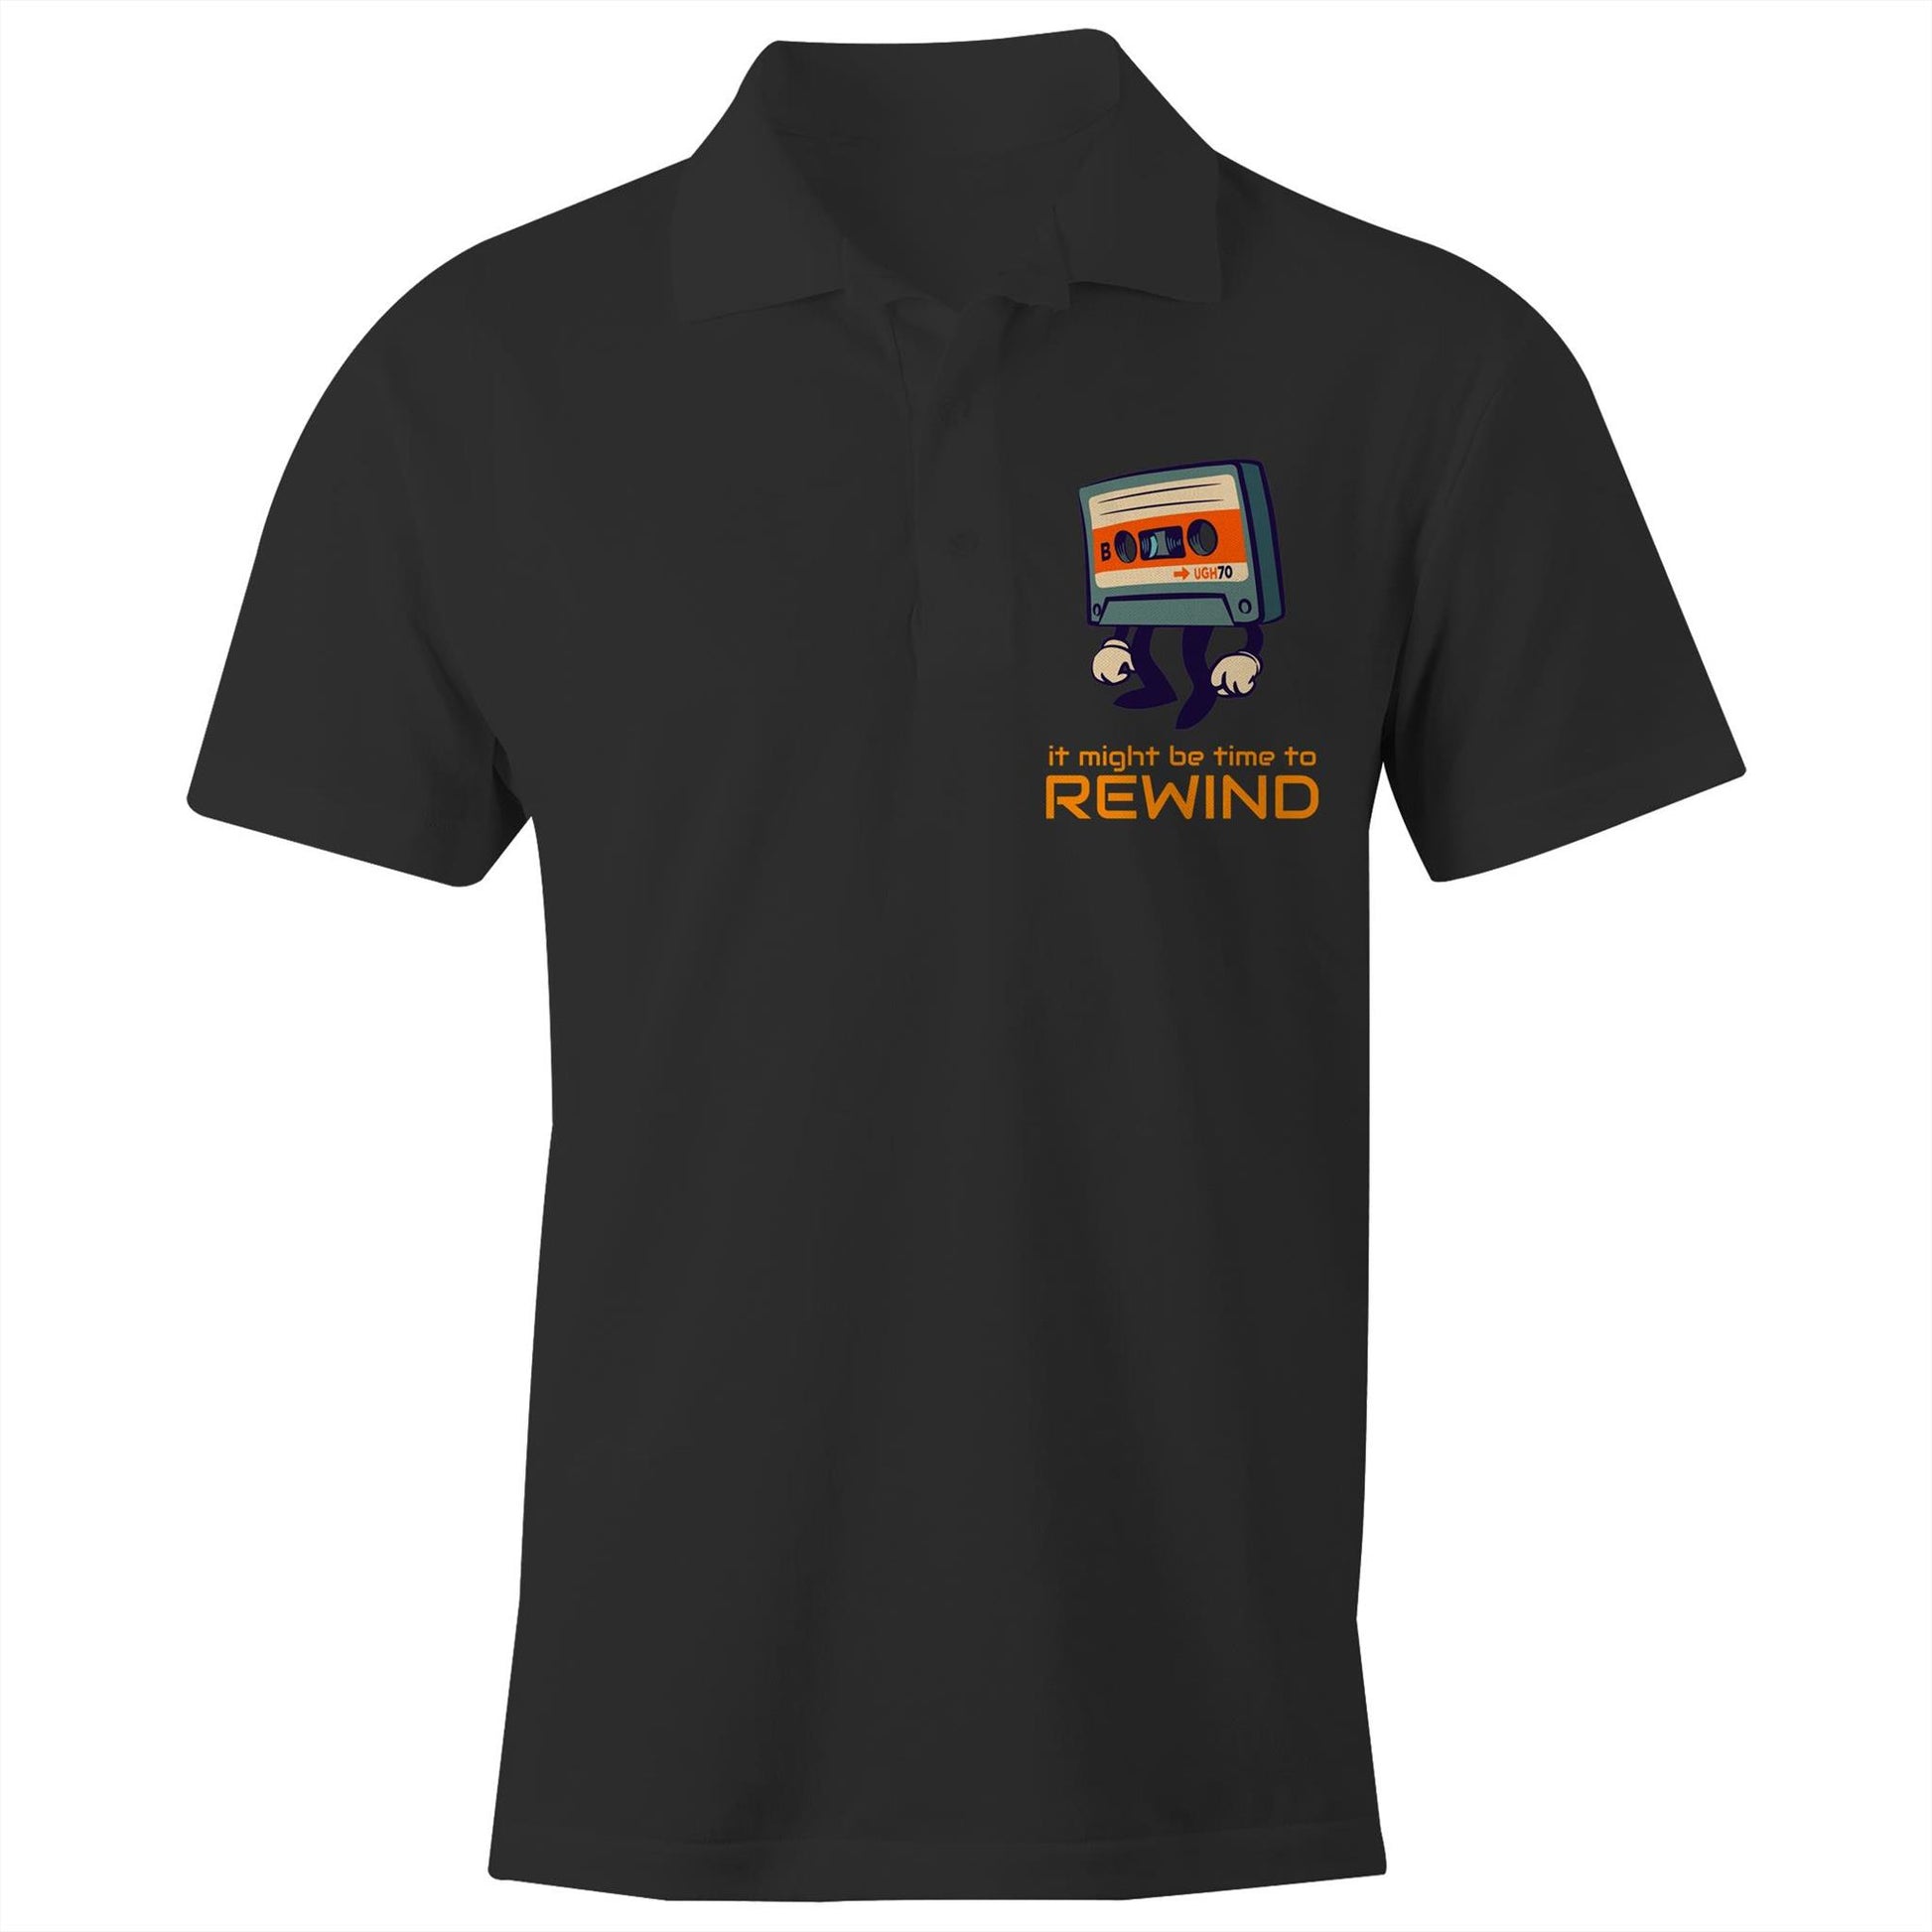 Cassette Tape, It Might Be Time To Rewind - Chad S/S Polo Shirt, Printed Black Polo Shirt Music Retro